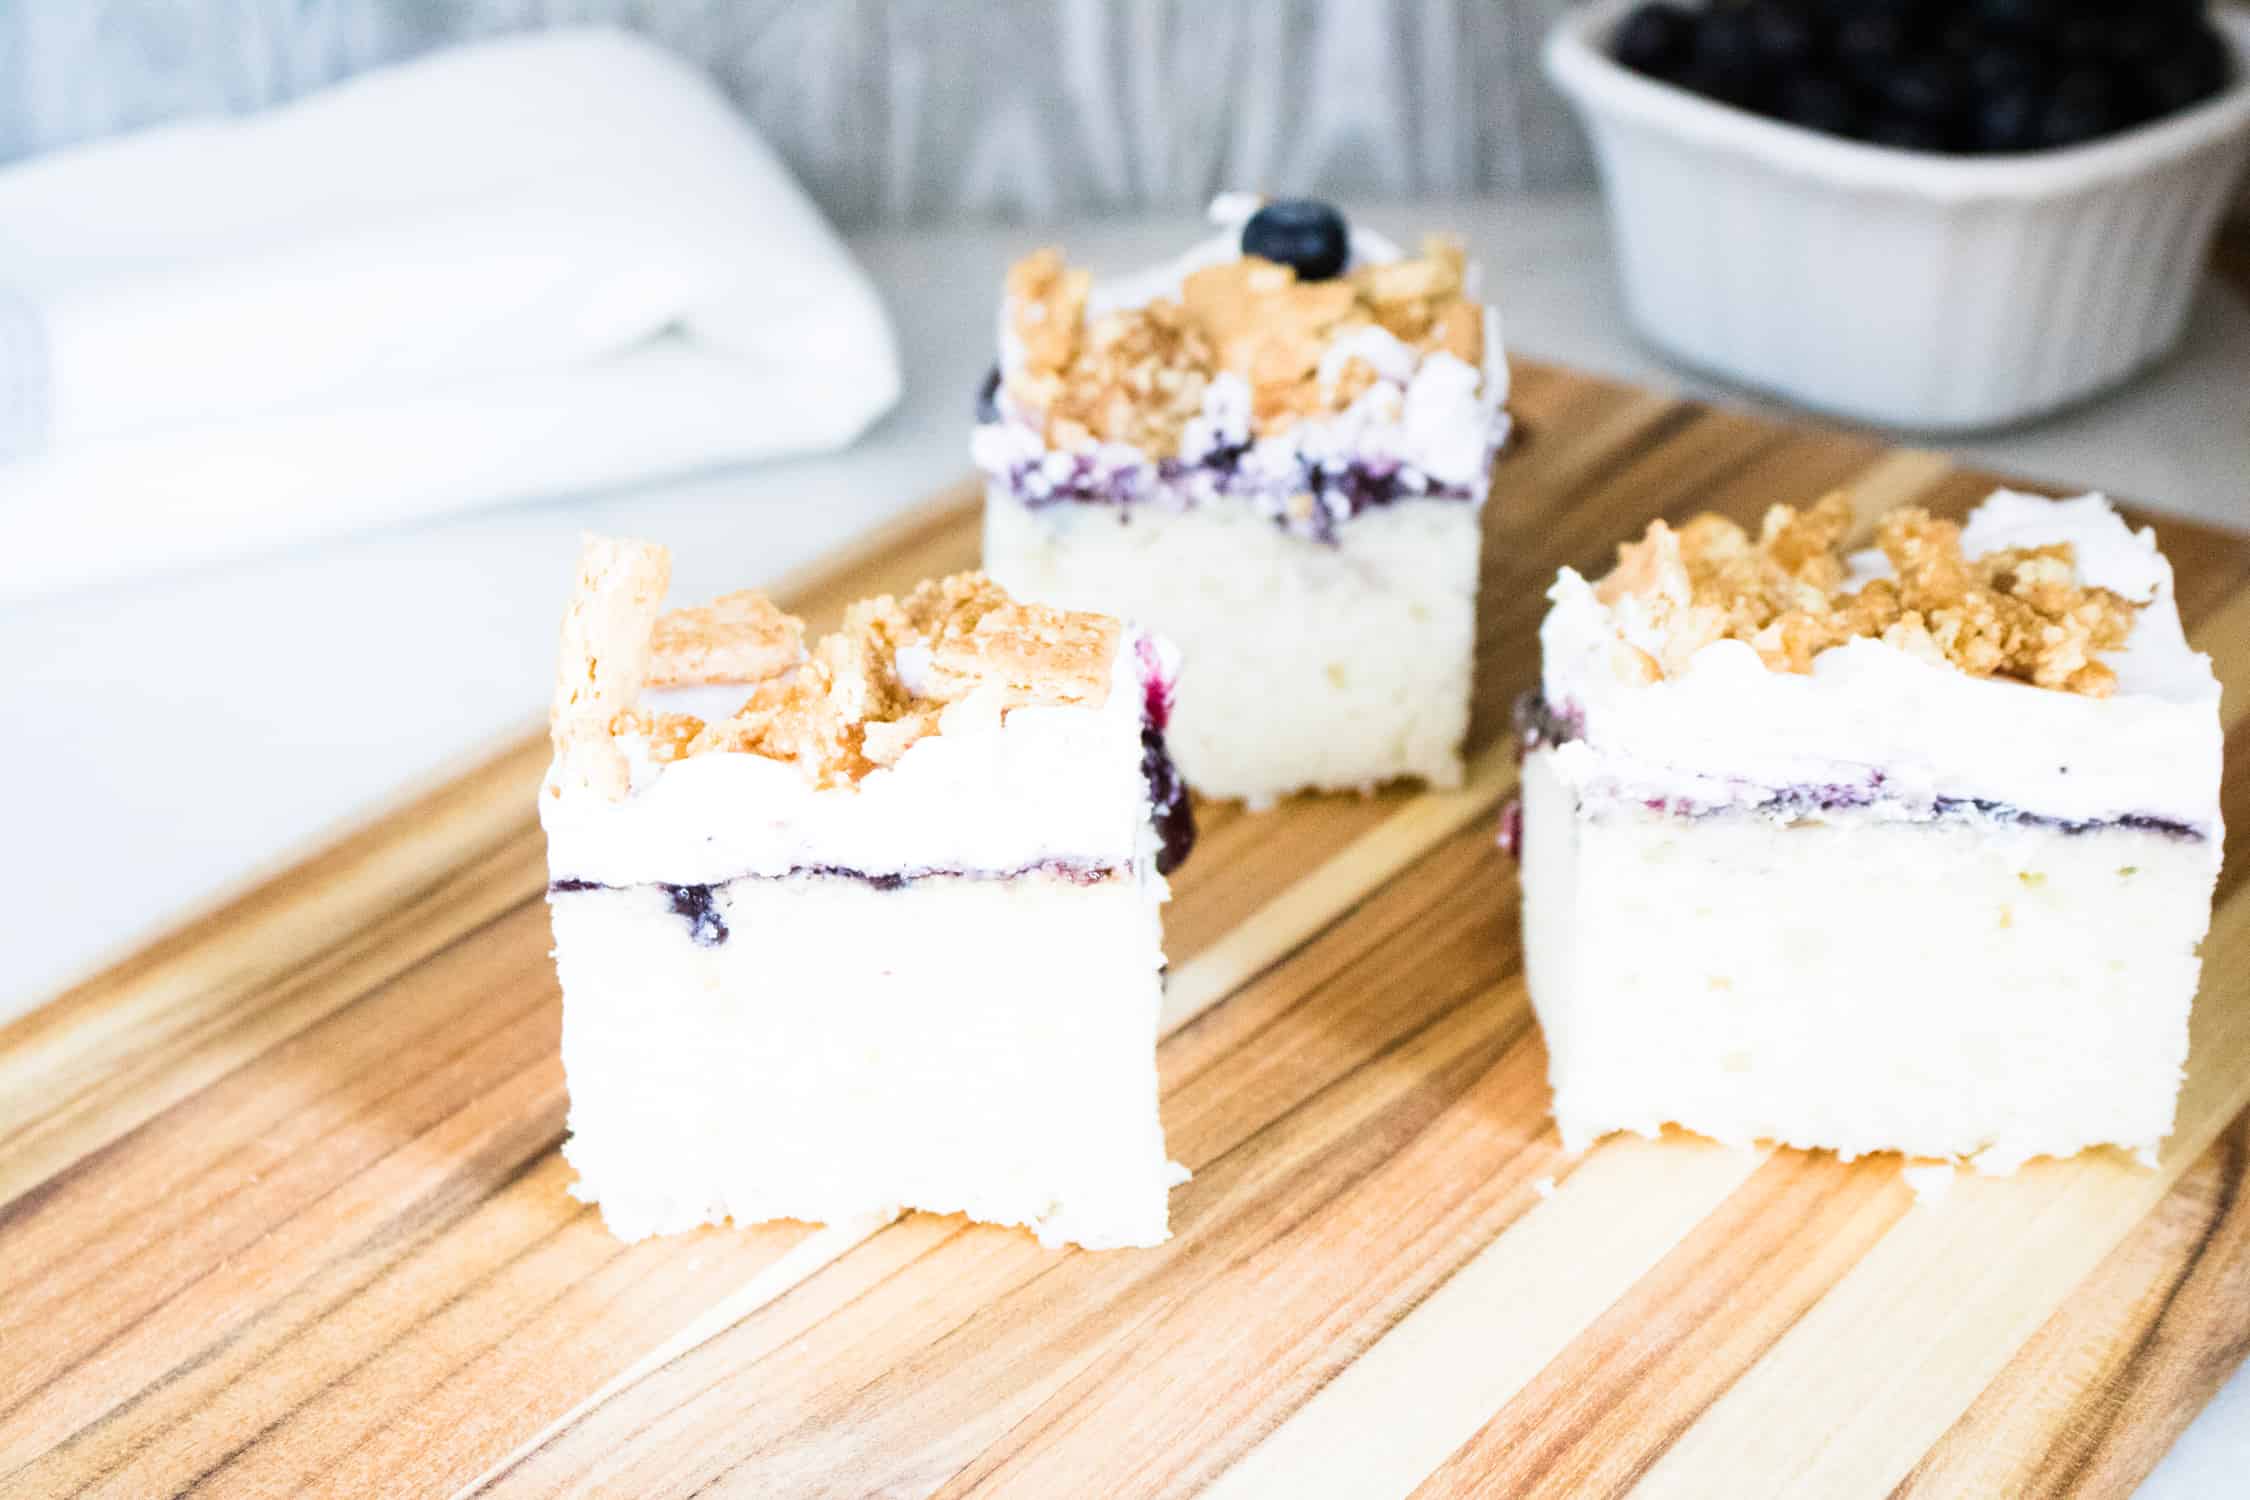 Three slices of blueberry buckle poke cake on a wooden cutting board in front of a white napkin and white bowl of blueberries